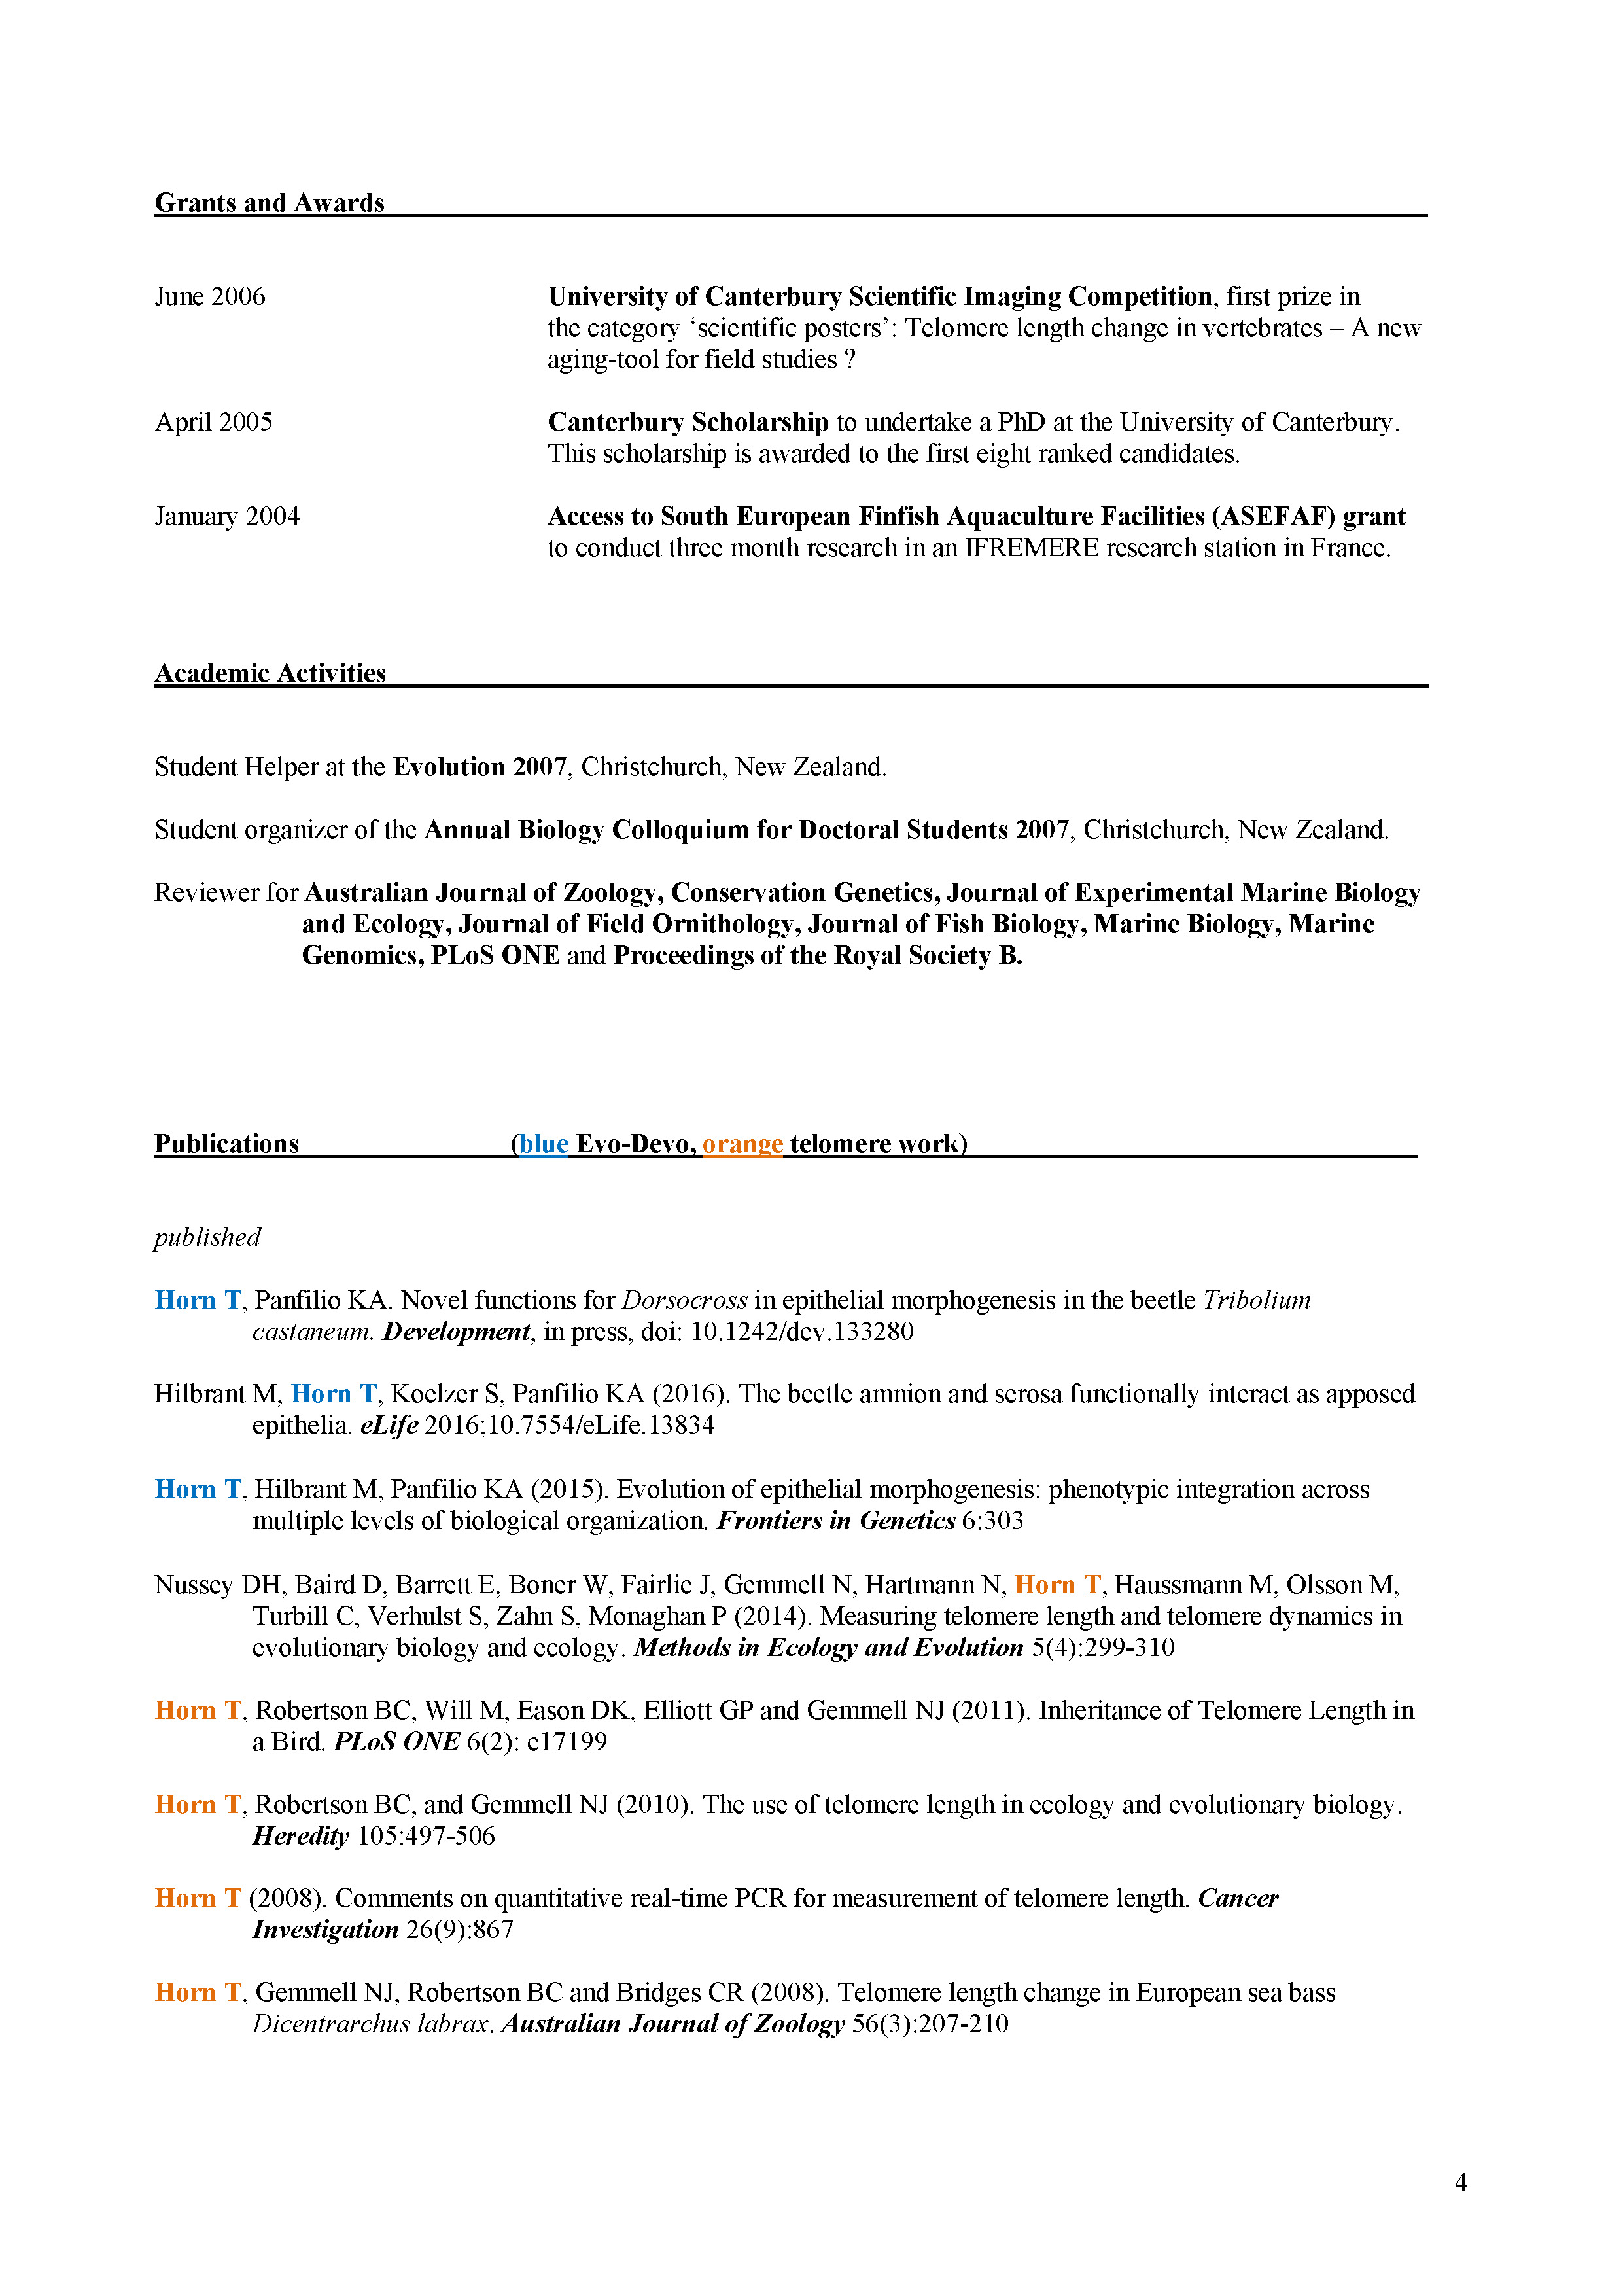 CV 2016-3 colourfull for homepage jpg_Page_4